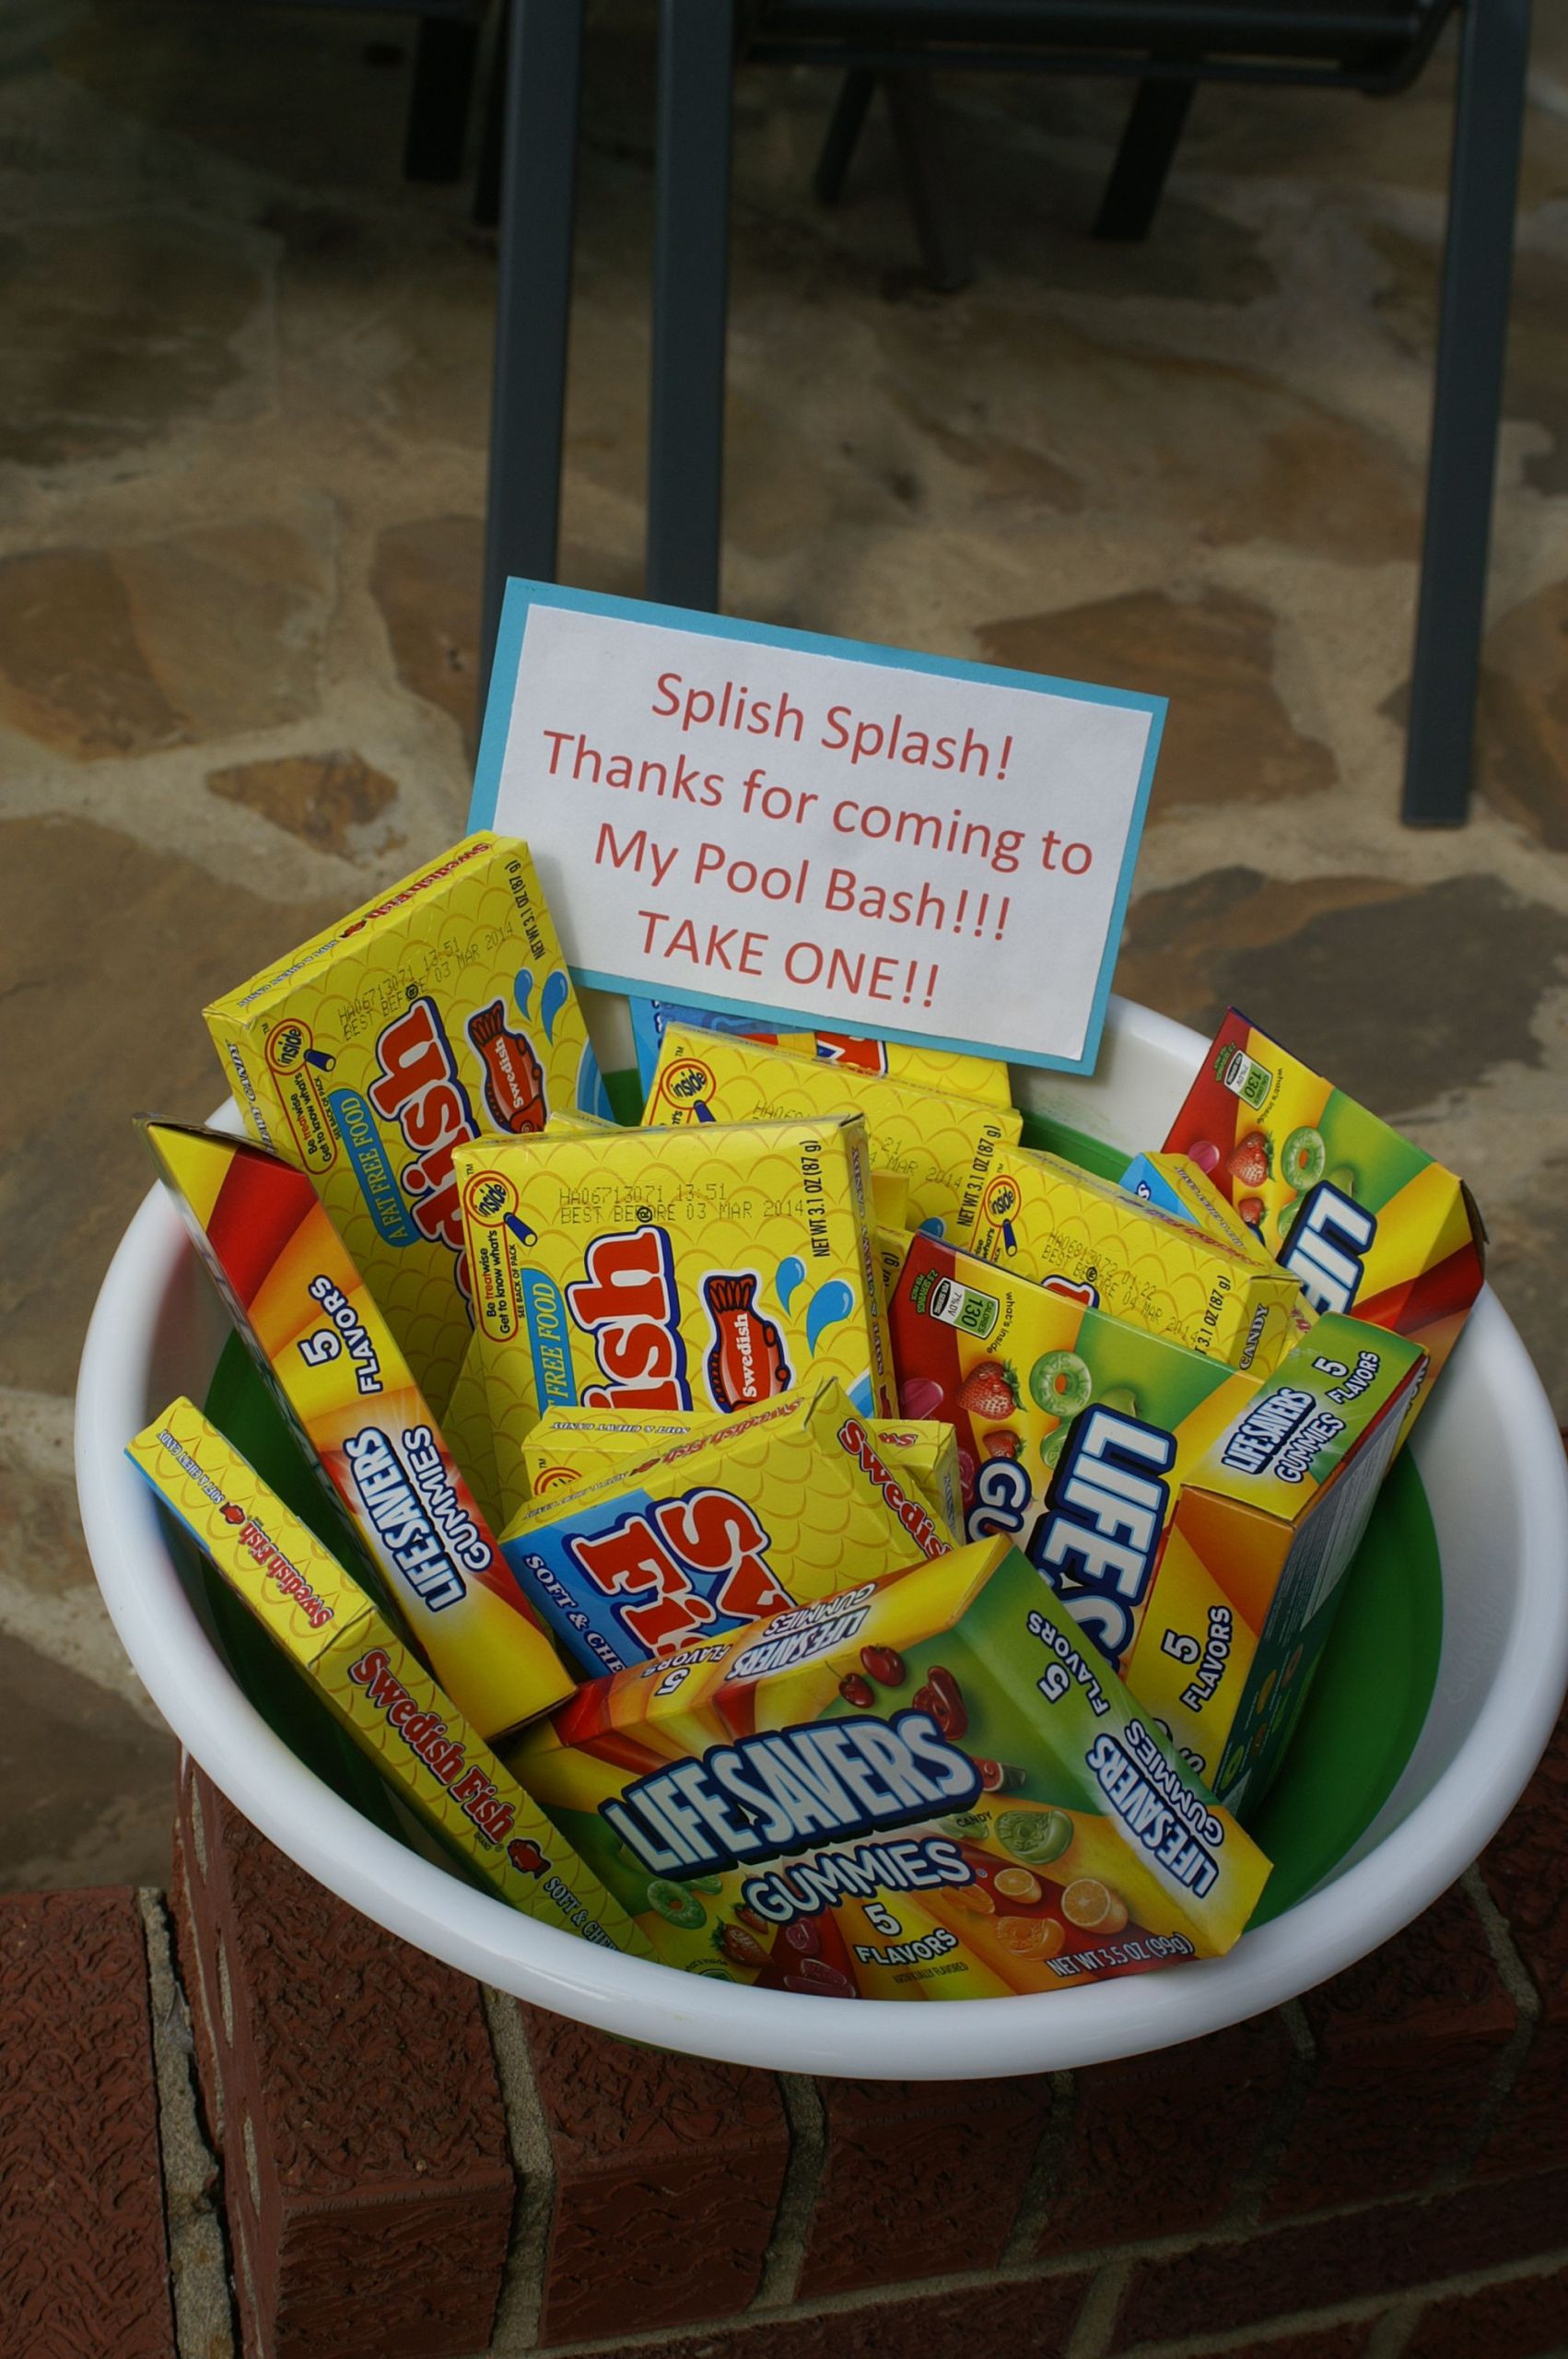 Pool Party Favor Ideas For Kids
 party favors for pool beach party eping it simple